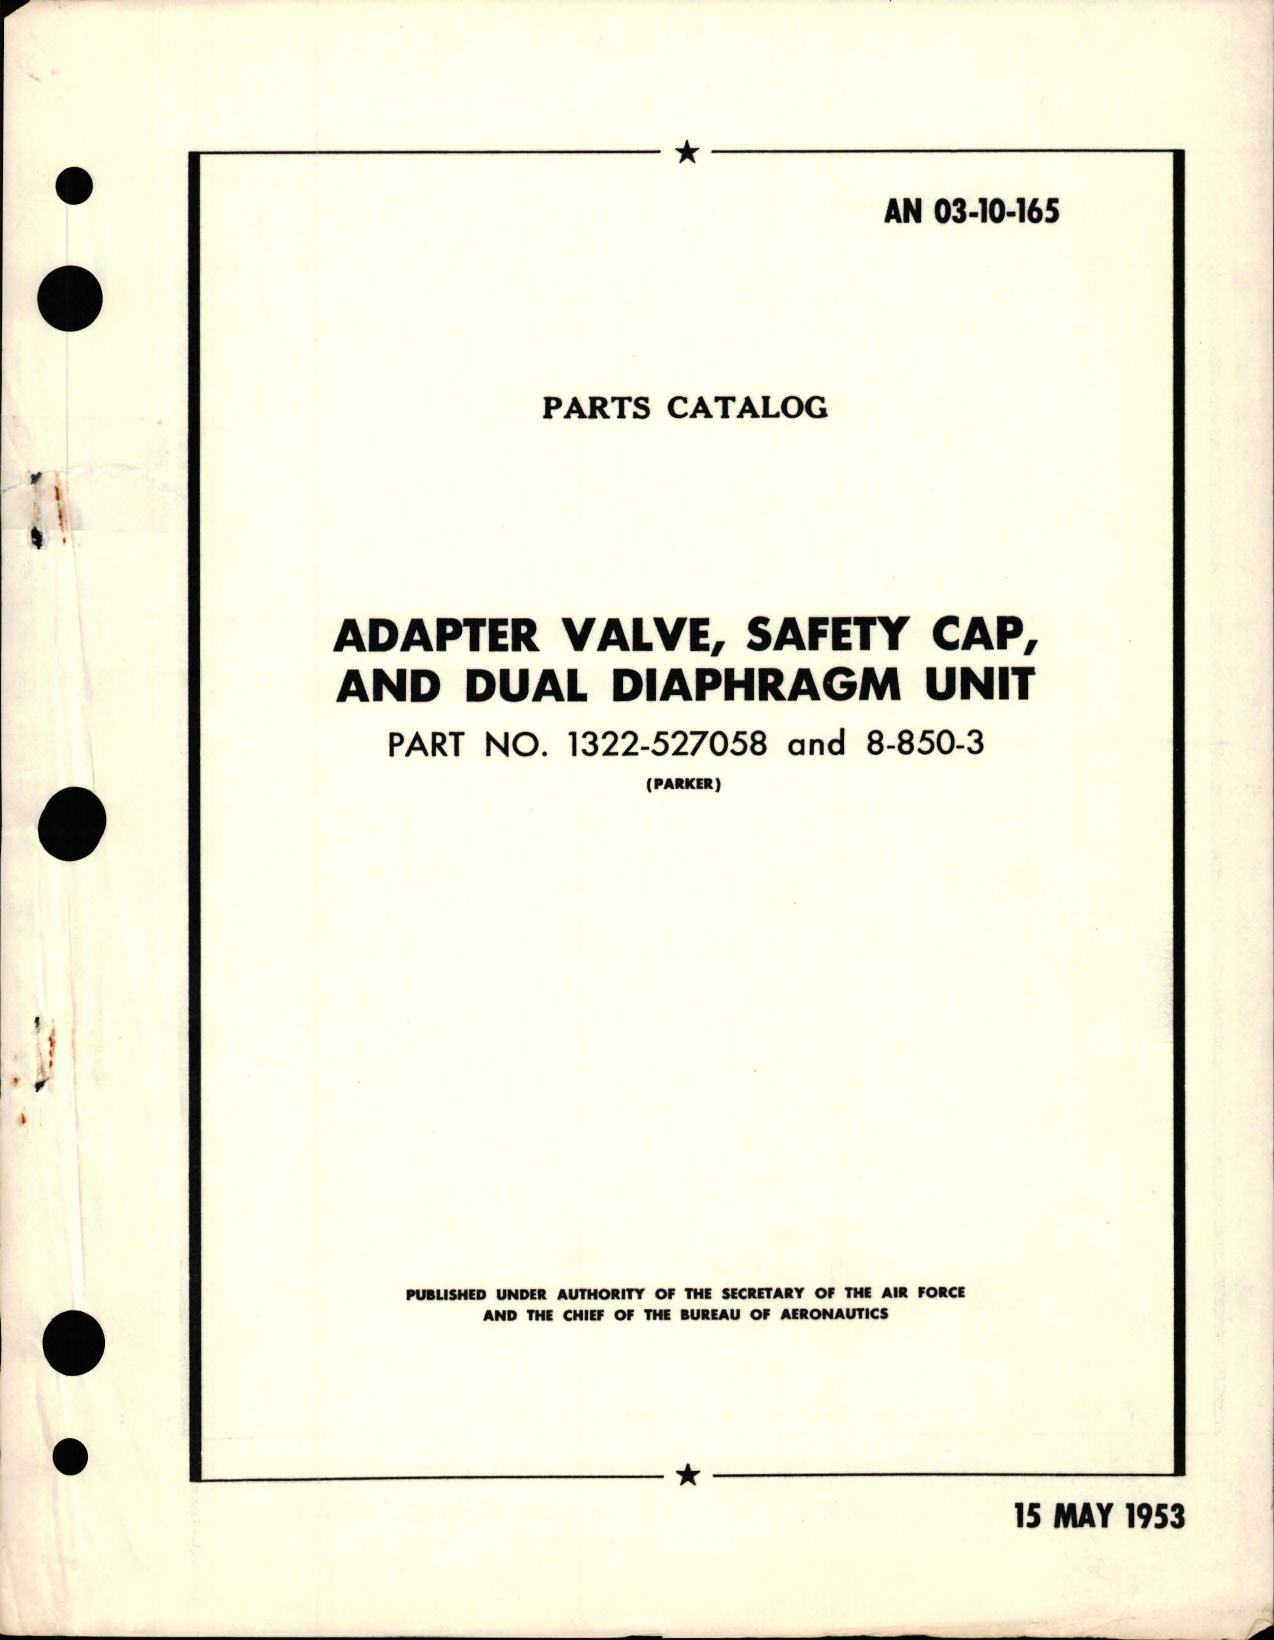 Sample page 1 from AirCorps Library document: Parts Catalog for Adapter Valve, Safety Cap, and Dual Diaphragm Unit - Part 1322-527058, 8-850-3